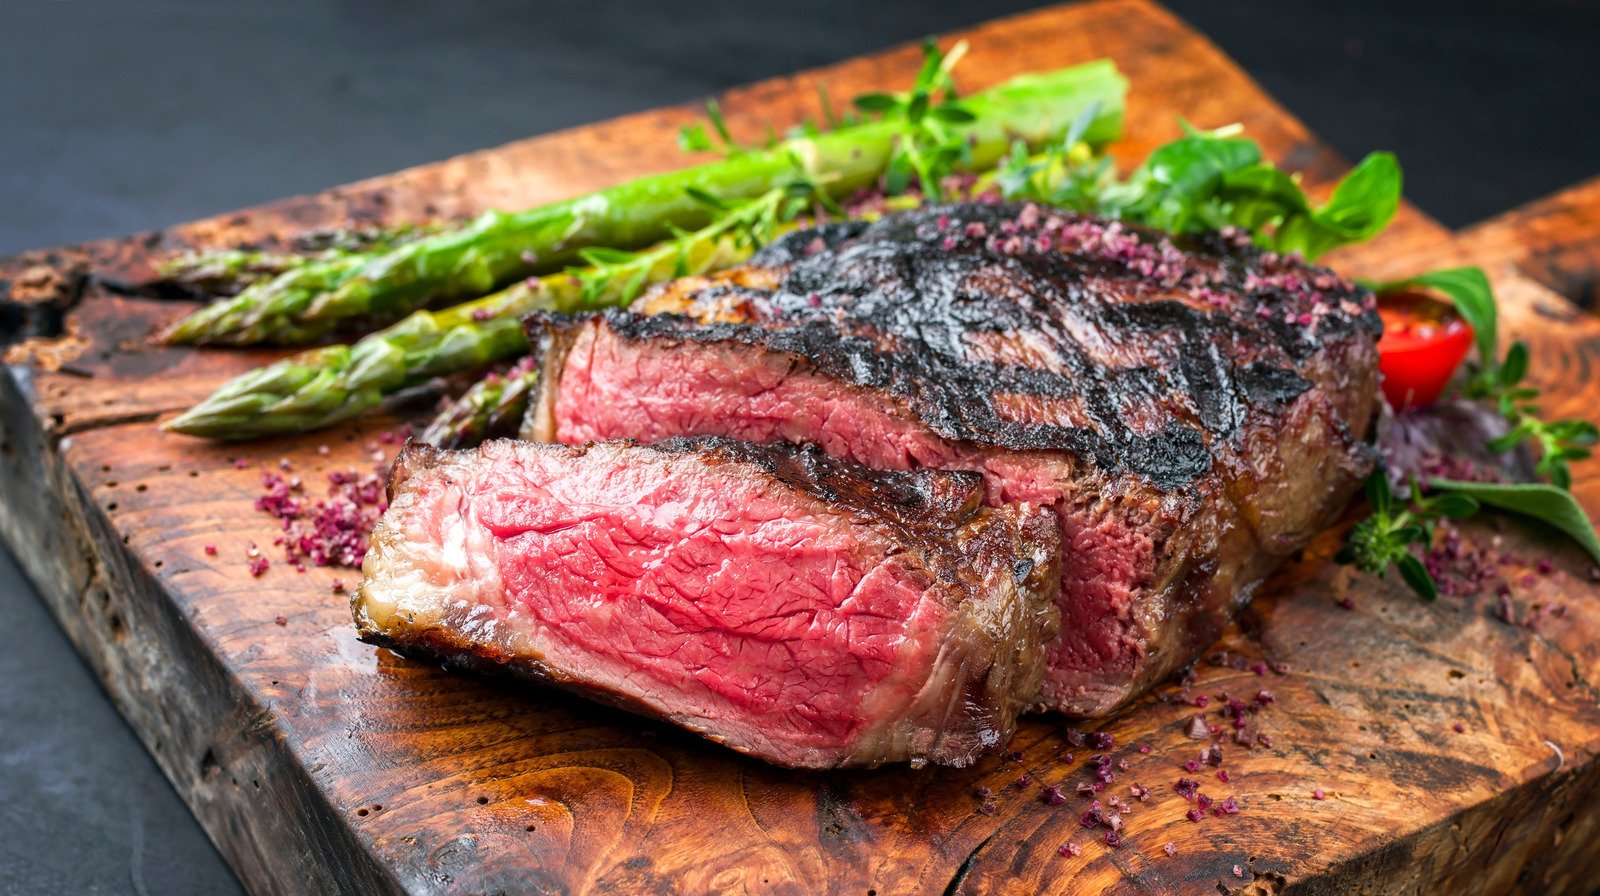 Chain Restaurant Steaks, Ranked From Worst To Best - Mashed